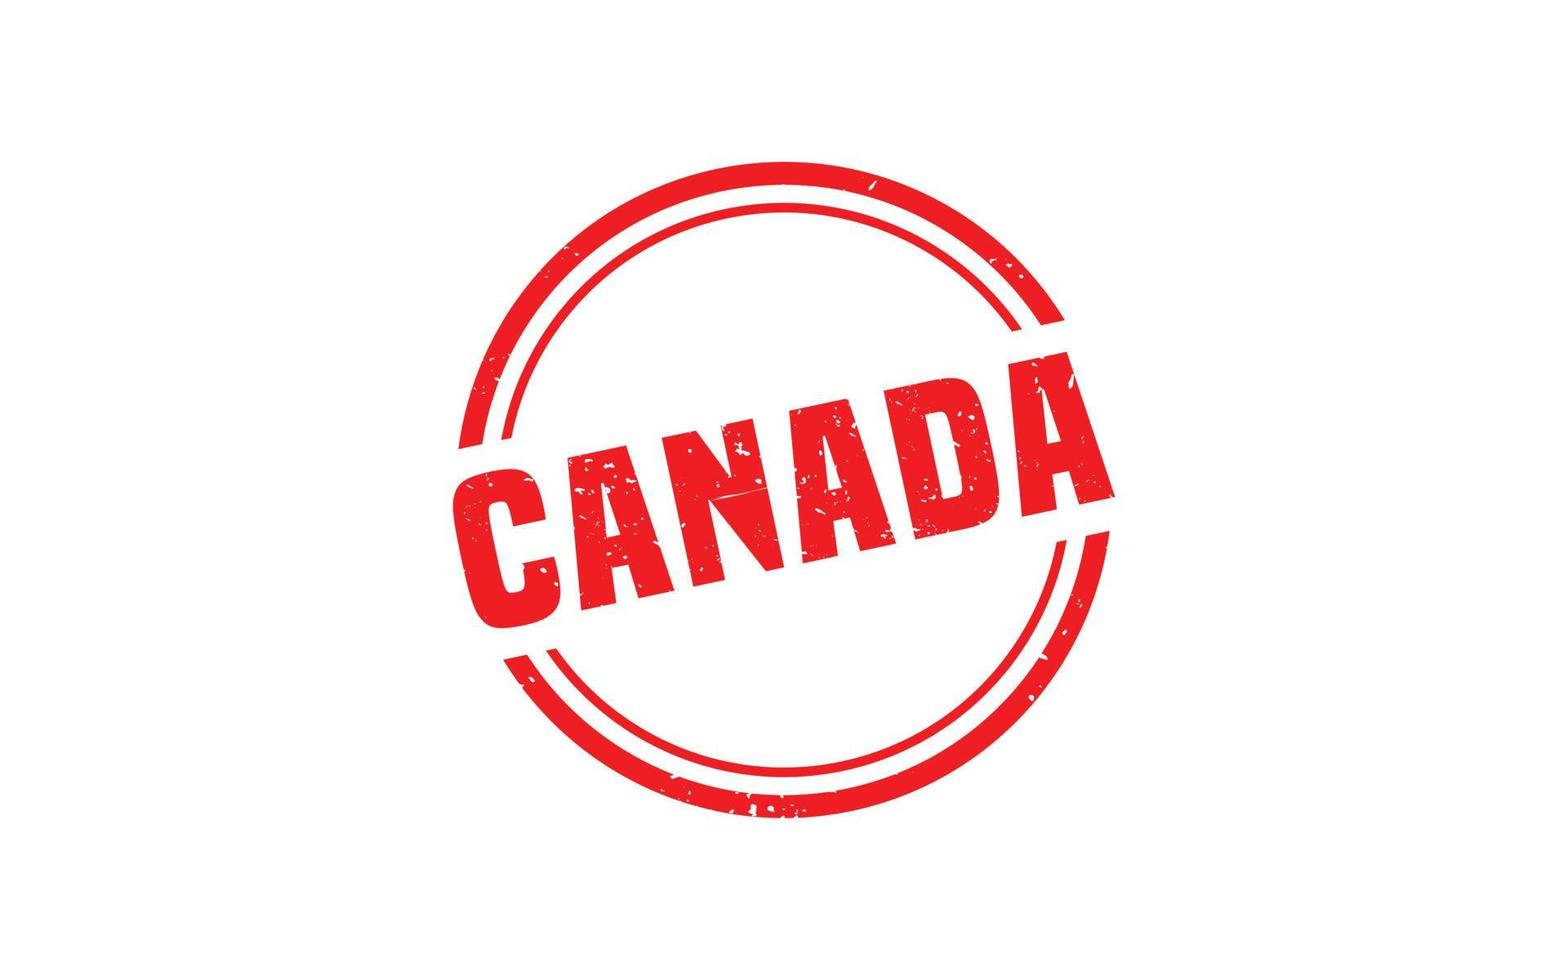 Canada stamp rubber with grunge style on white background vector